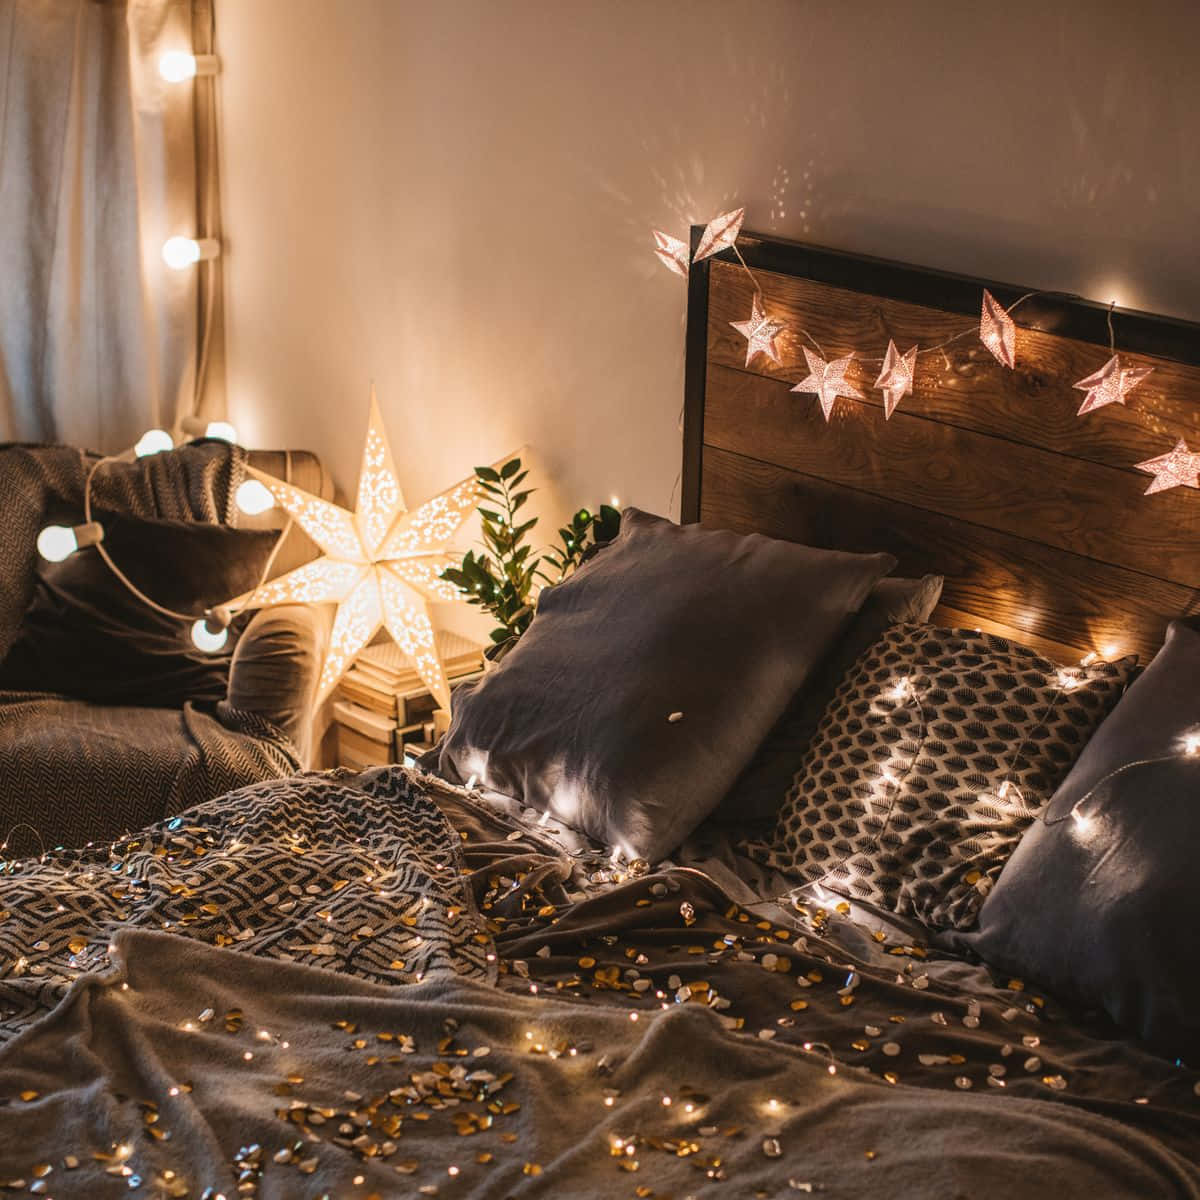 Gorgeous pink fairy lights, perfect for cozy decor! Wallpaper